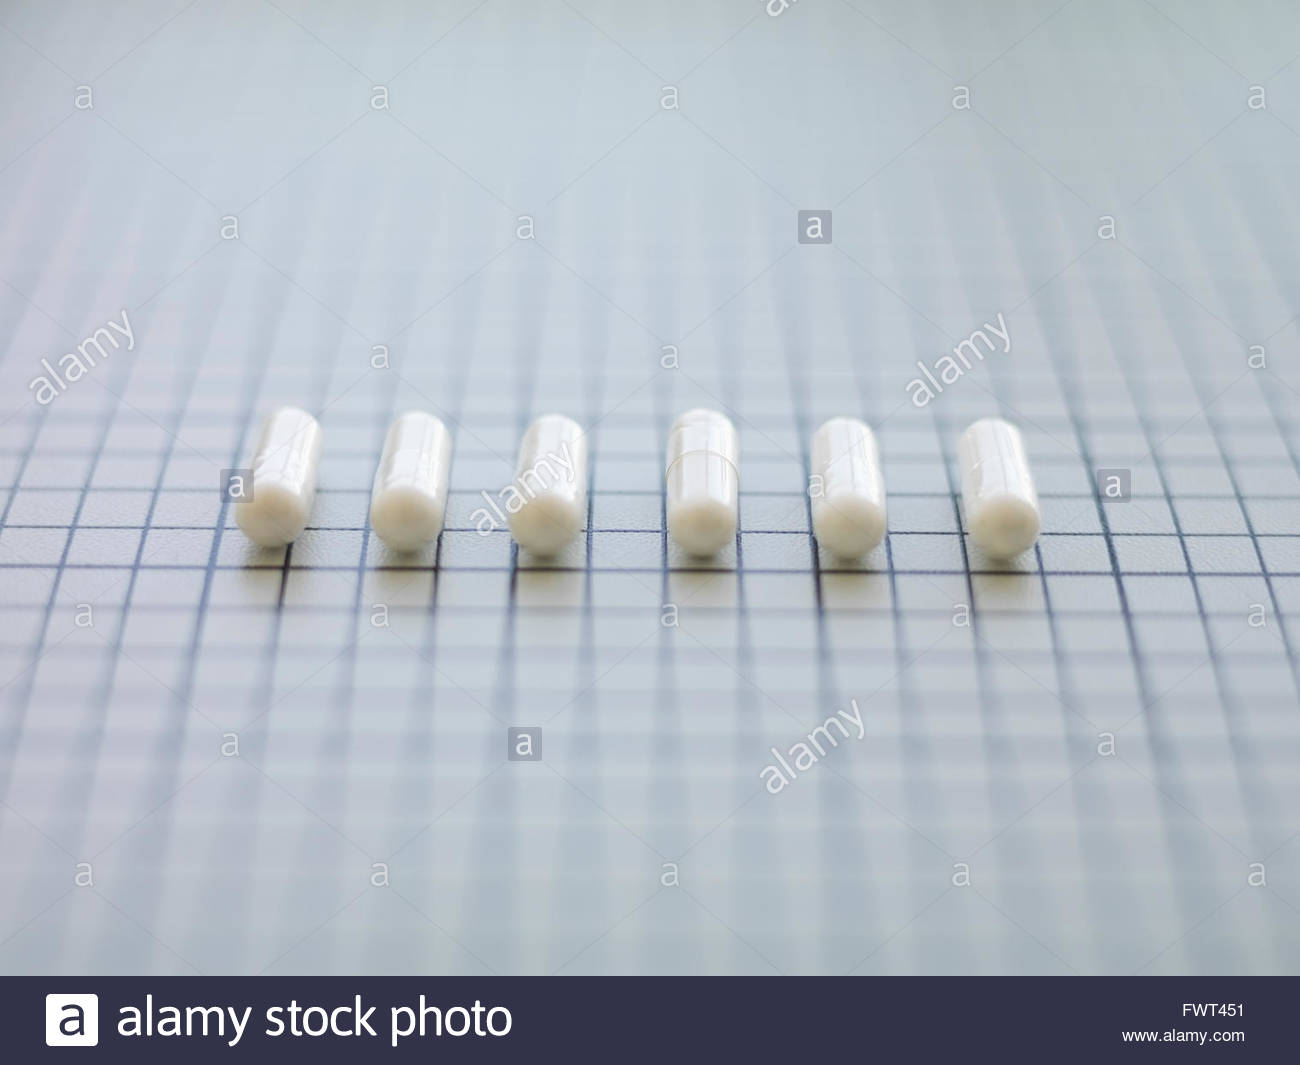 Capsules arranged side by side on table Stock Photo